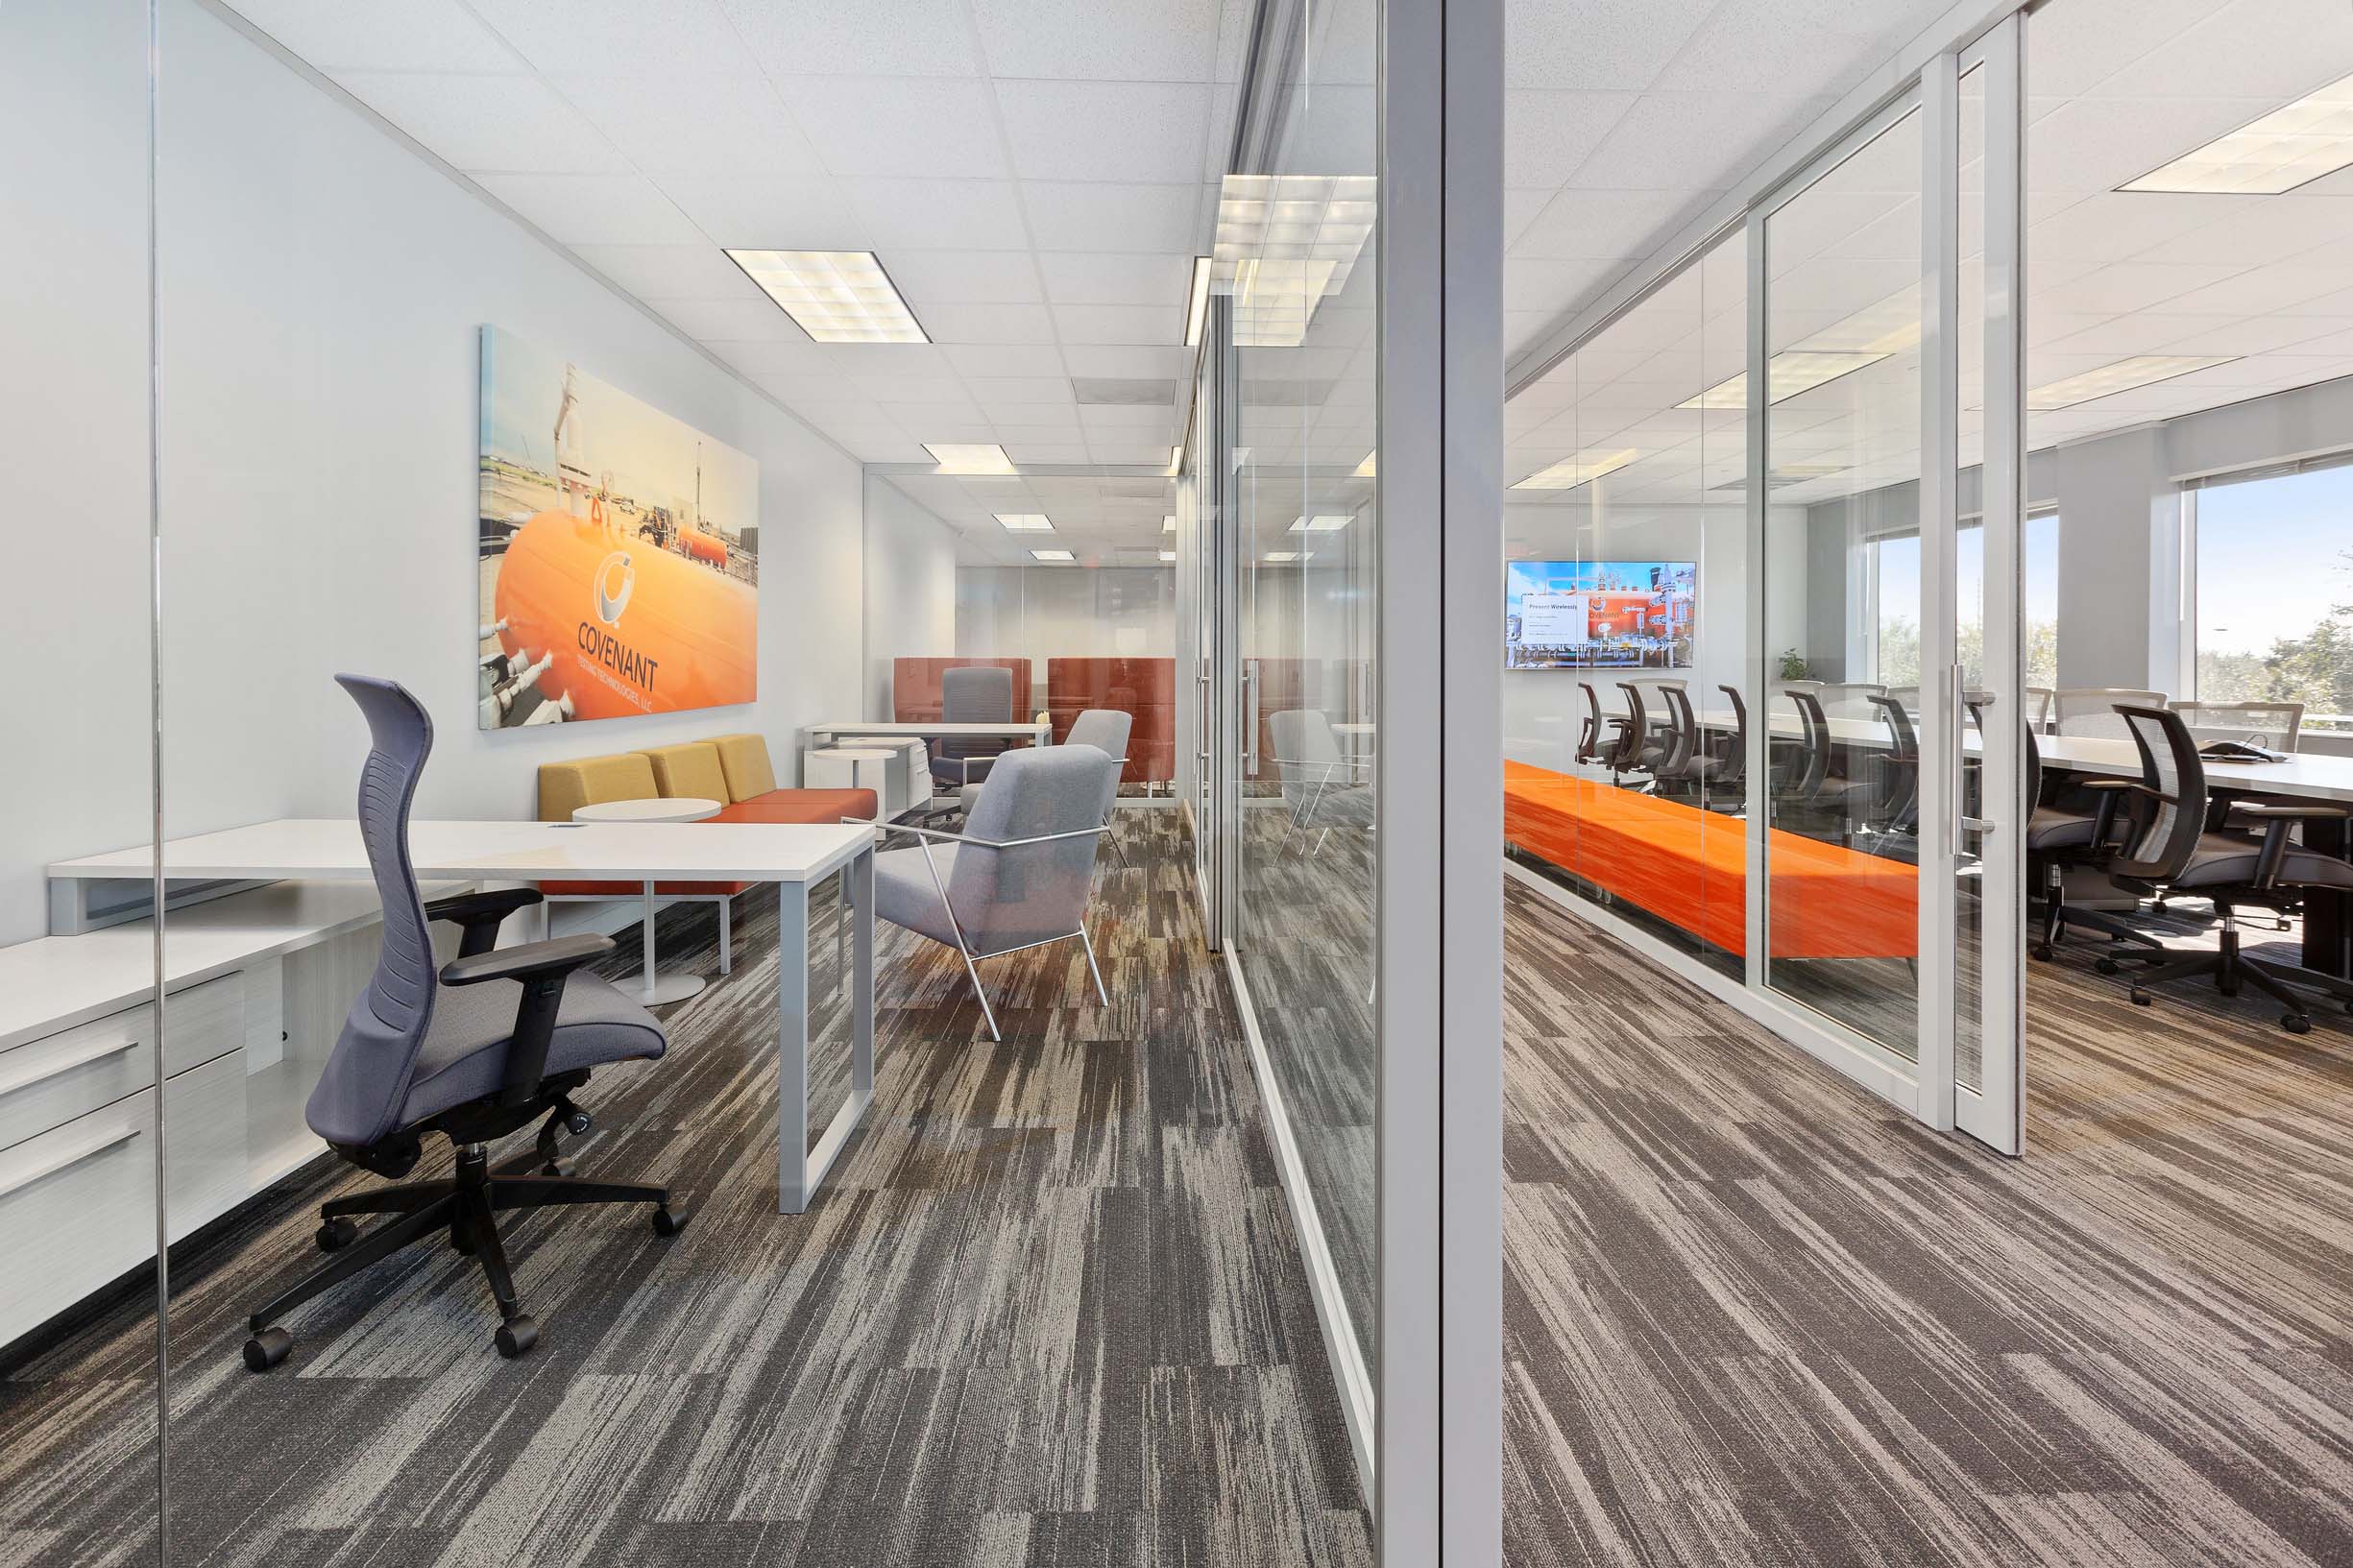 new office furnished in orange and grey with glass walls